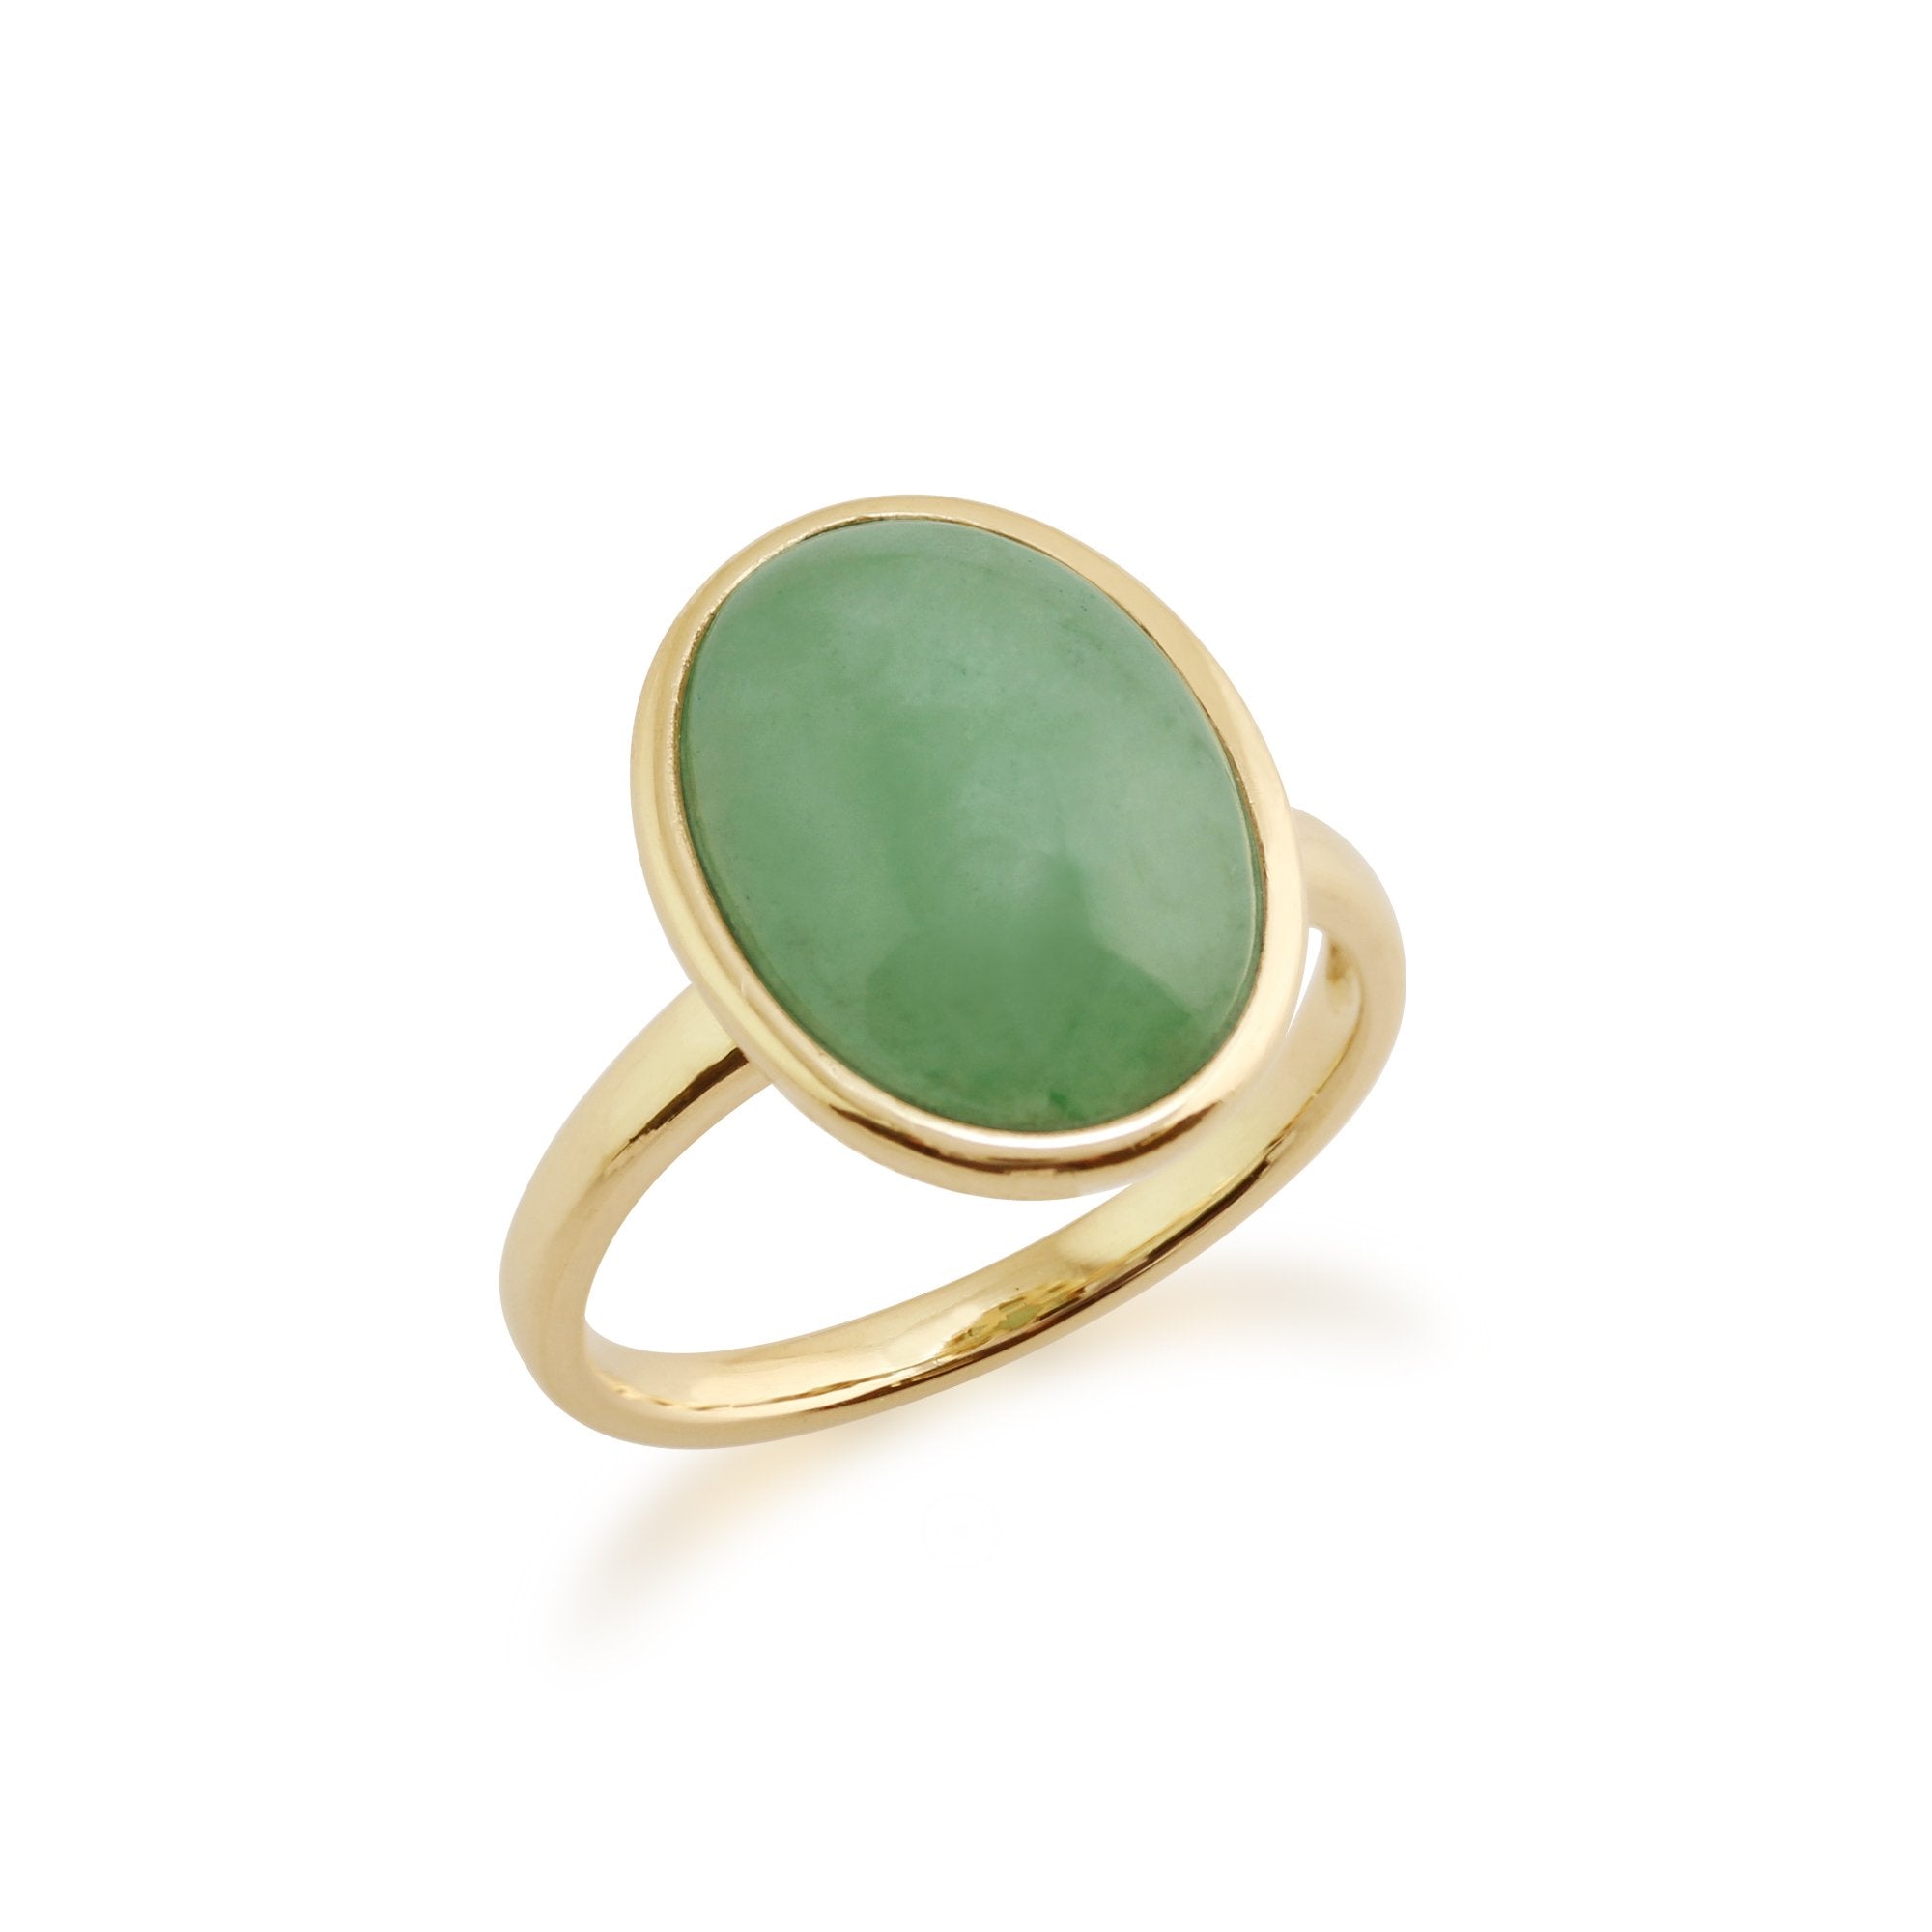 Statement Oval Jade Ring in 9ct Yellow Gold